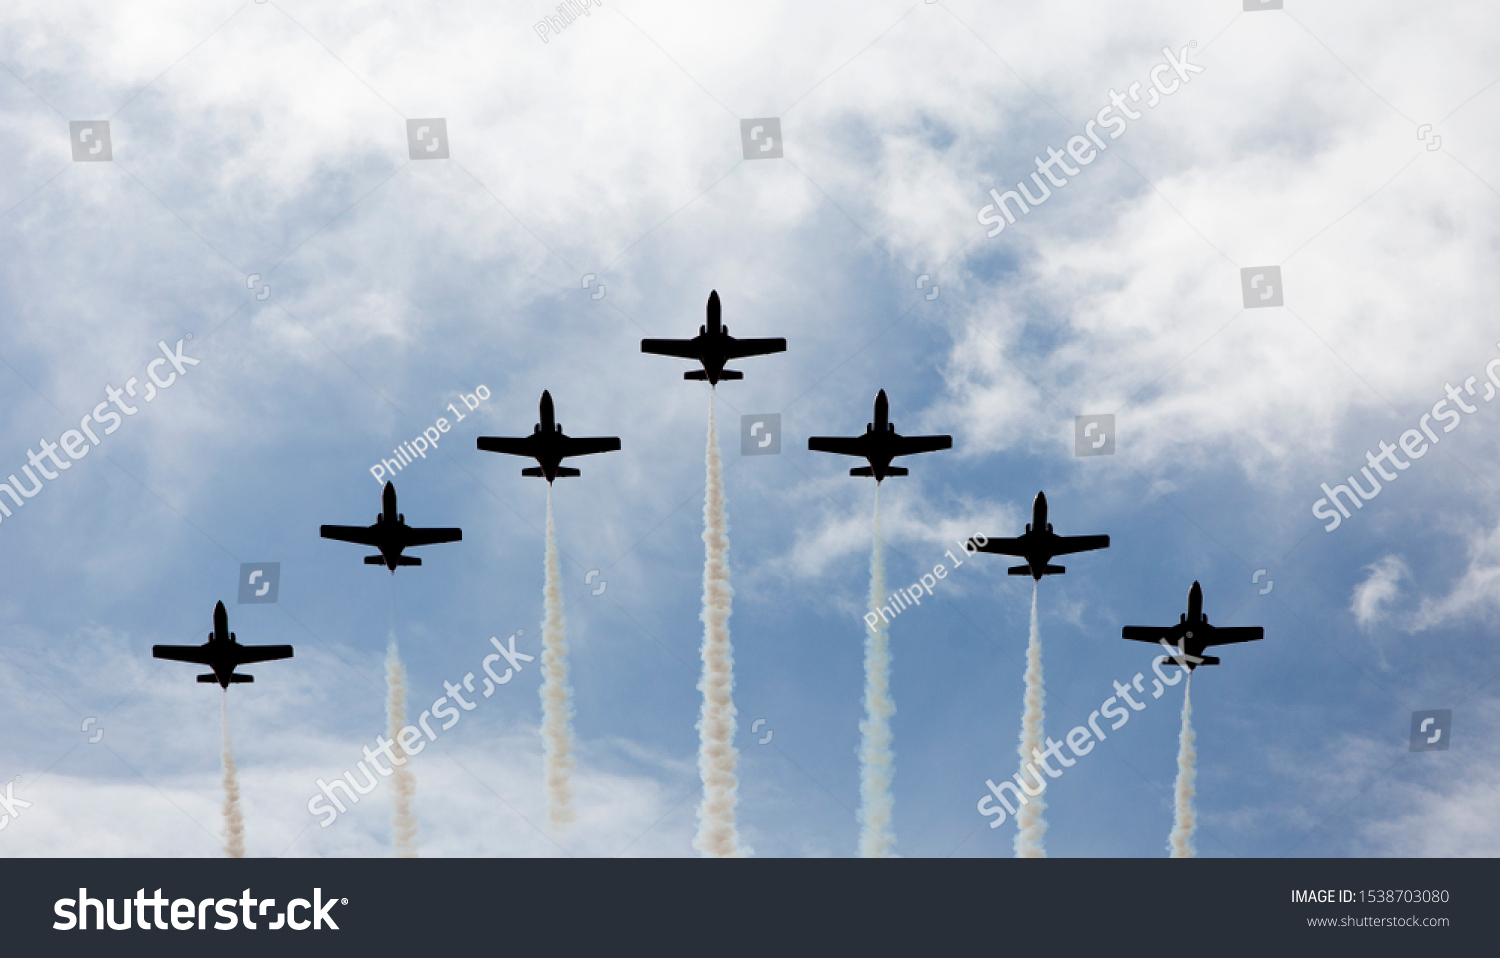 "Aguila air patrol" in Exhibition and Air parade in the sky of Madrid, Spain #1538703080